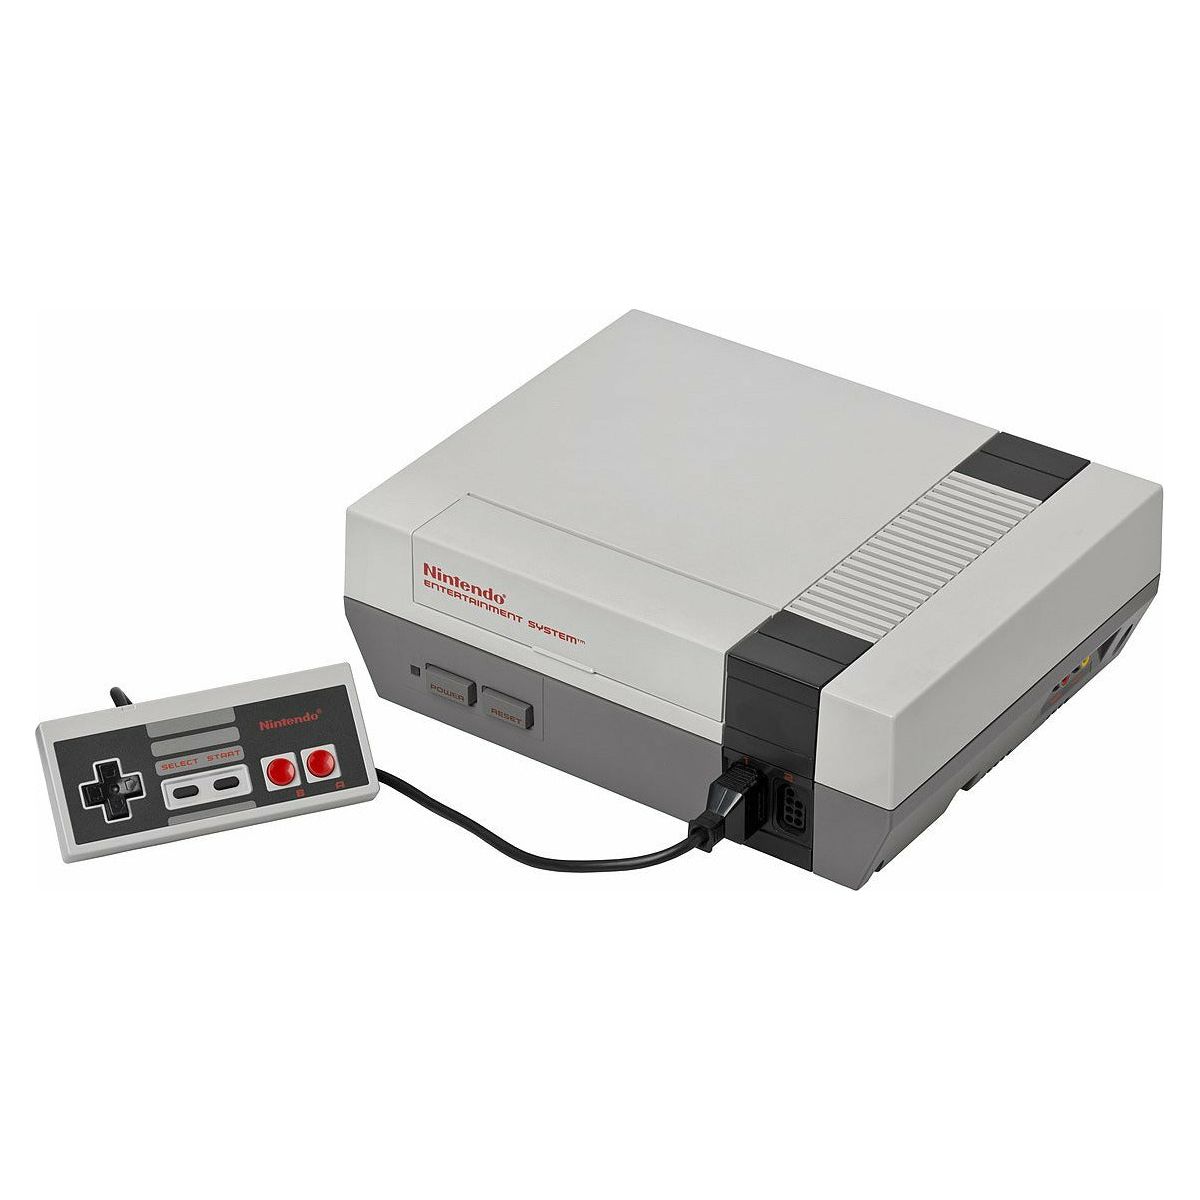 Nintendo Entertainment System with New 72 Pin Connector